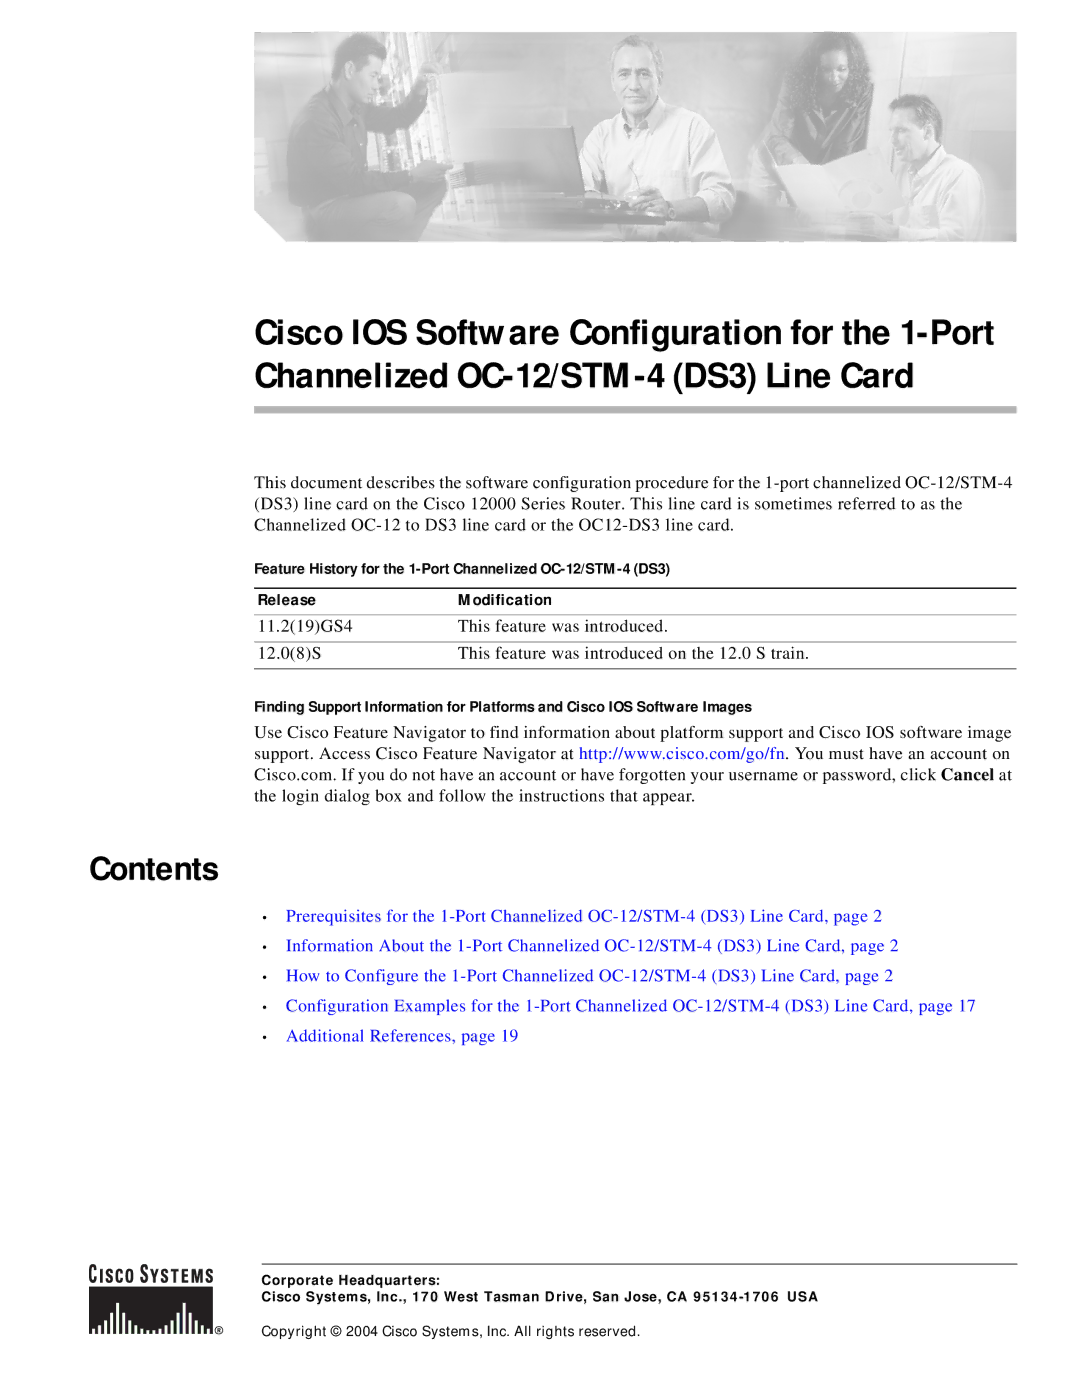 Cisco Systems OC-12/STM-14 manual Contents 